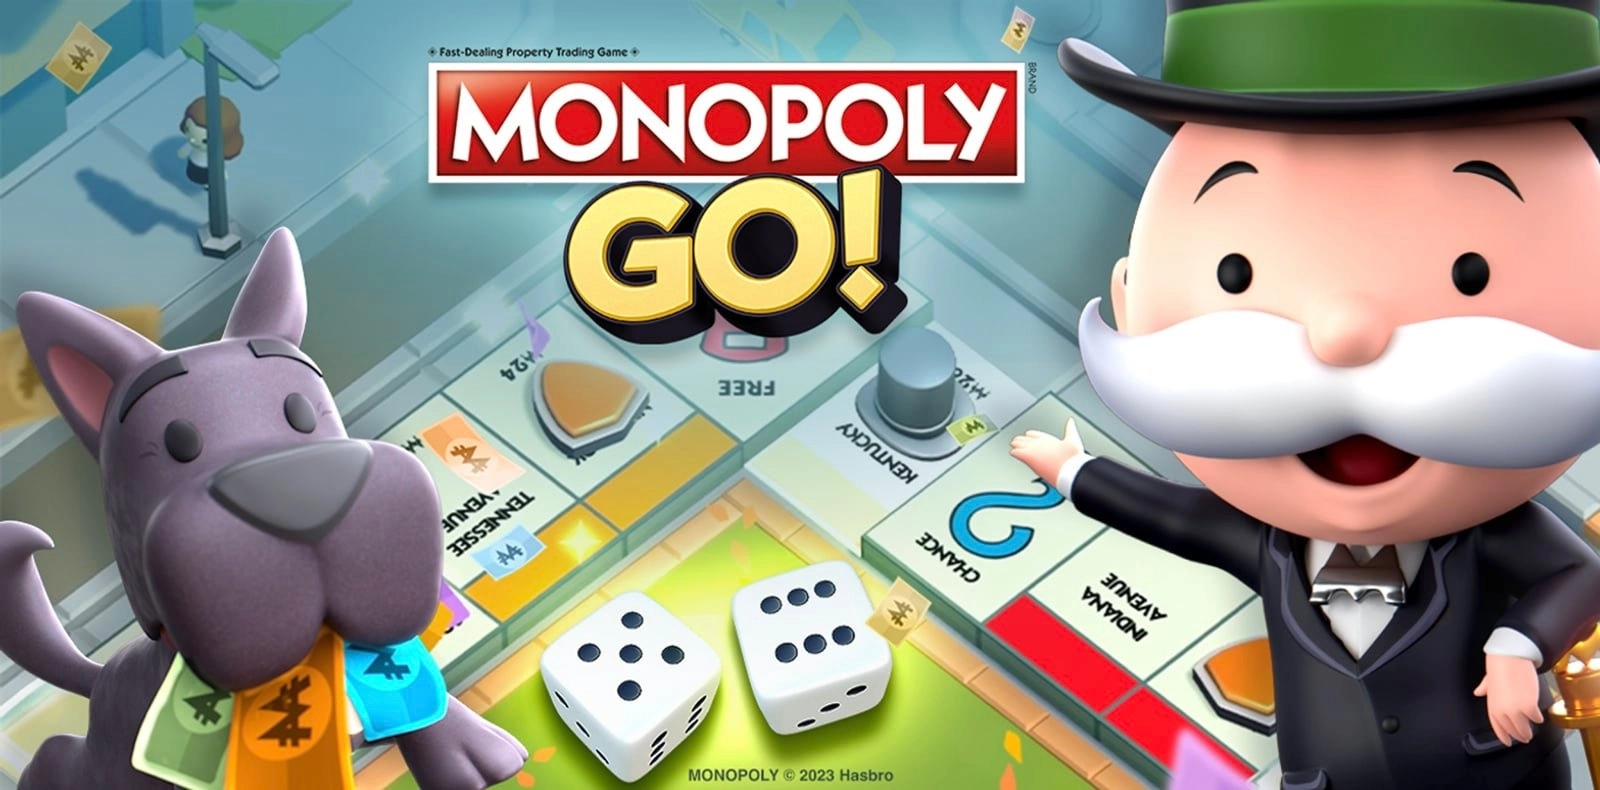 Monopoly Go: errors & crash issues in Thanksgiving partners event